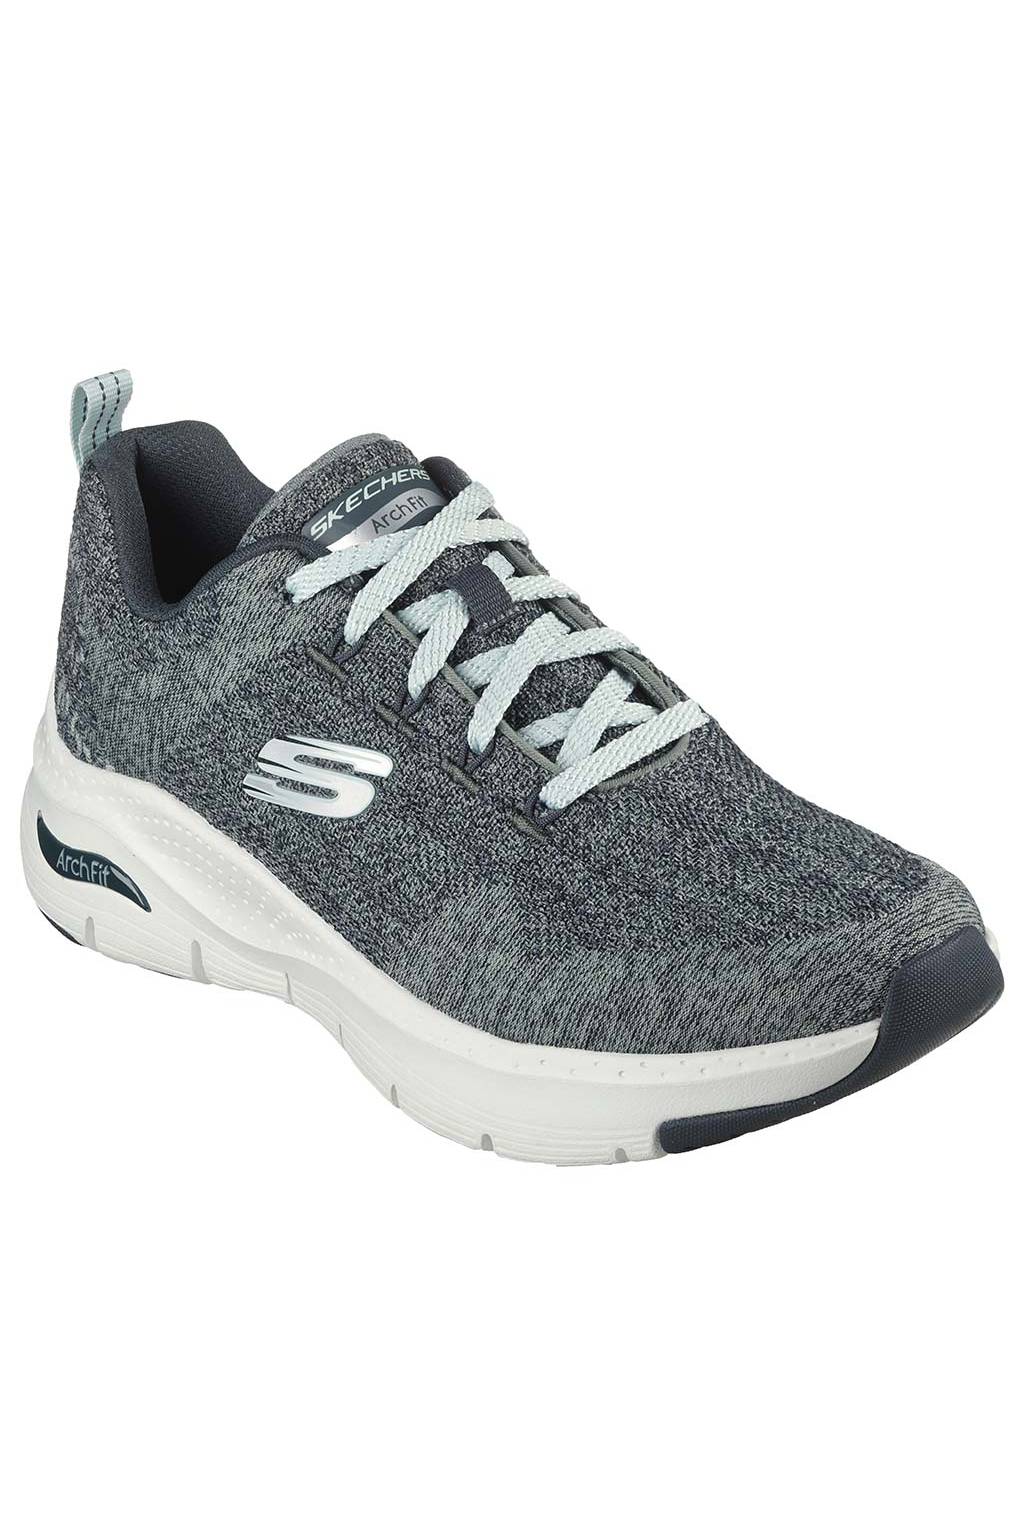 Skechers Arch Fit Paradyme | lupon.gov.ph